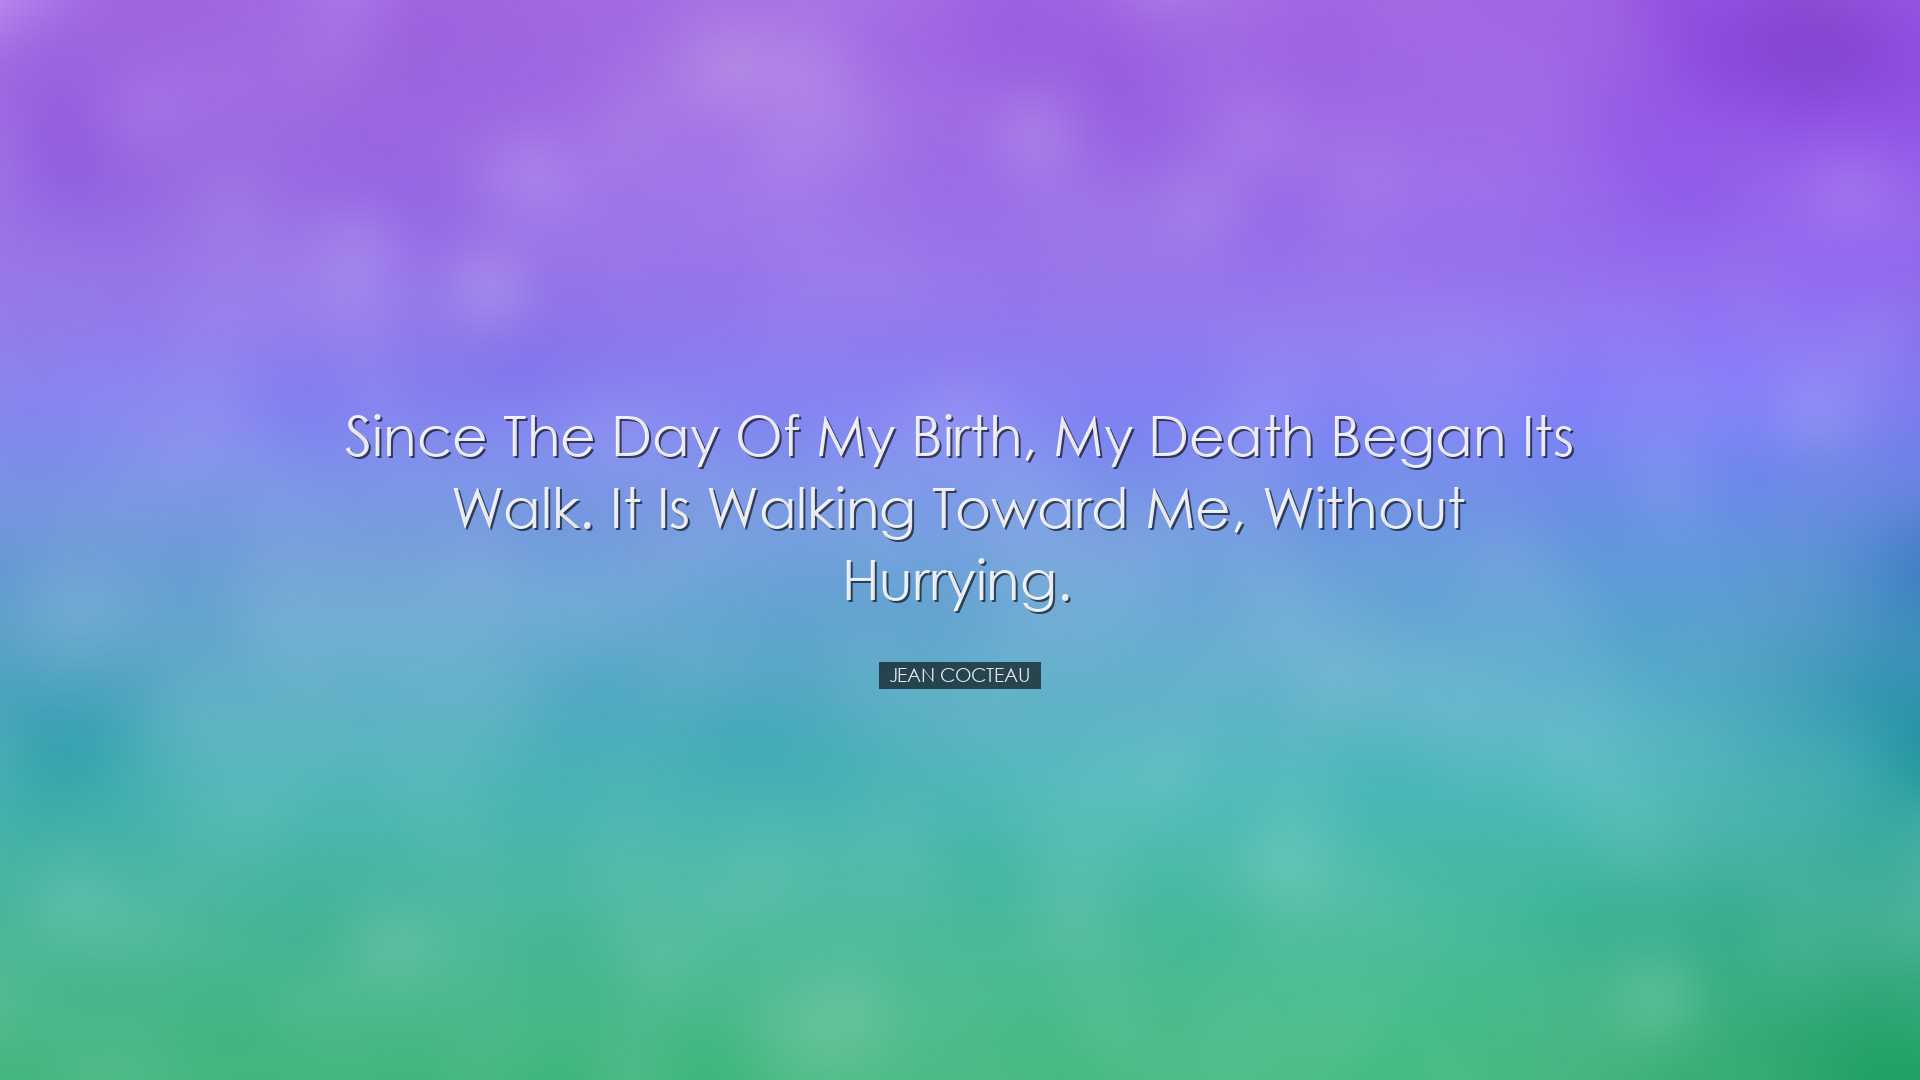 Since the day of my birth, my death began its walk. It is walking